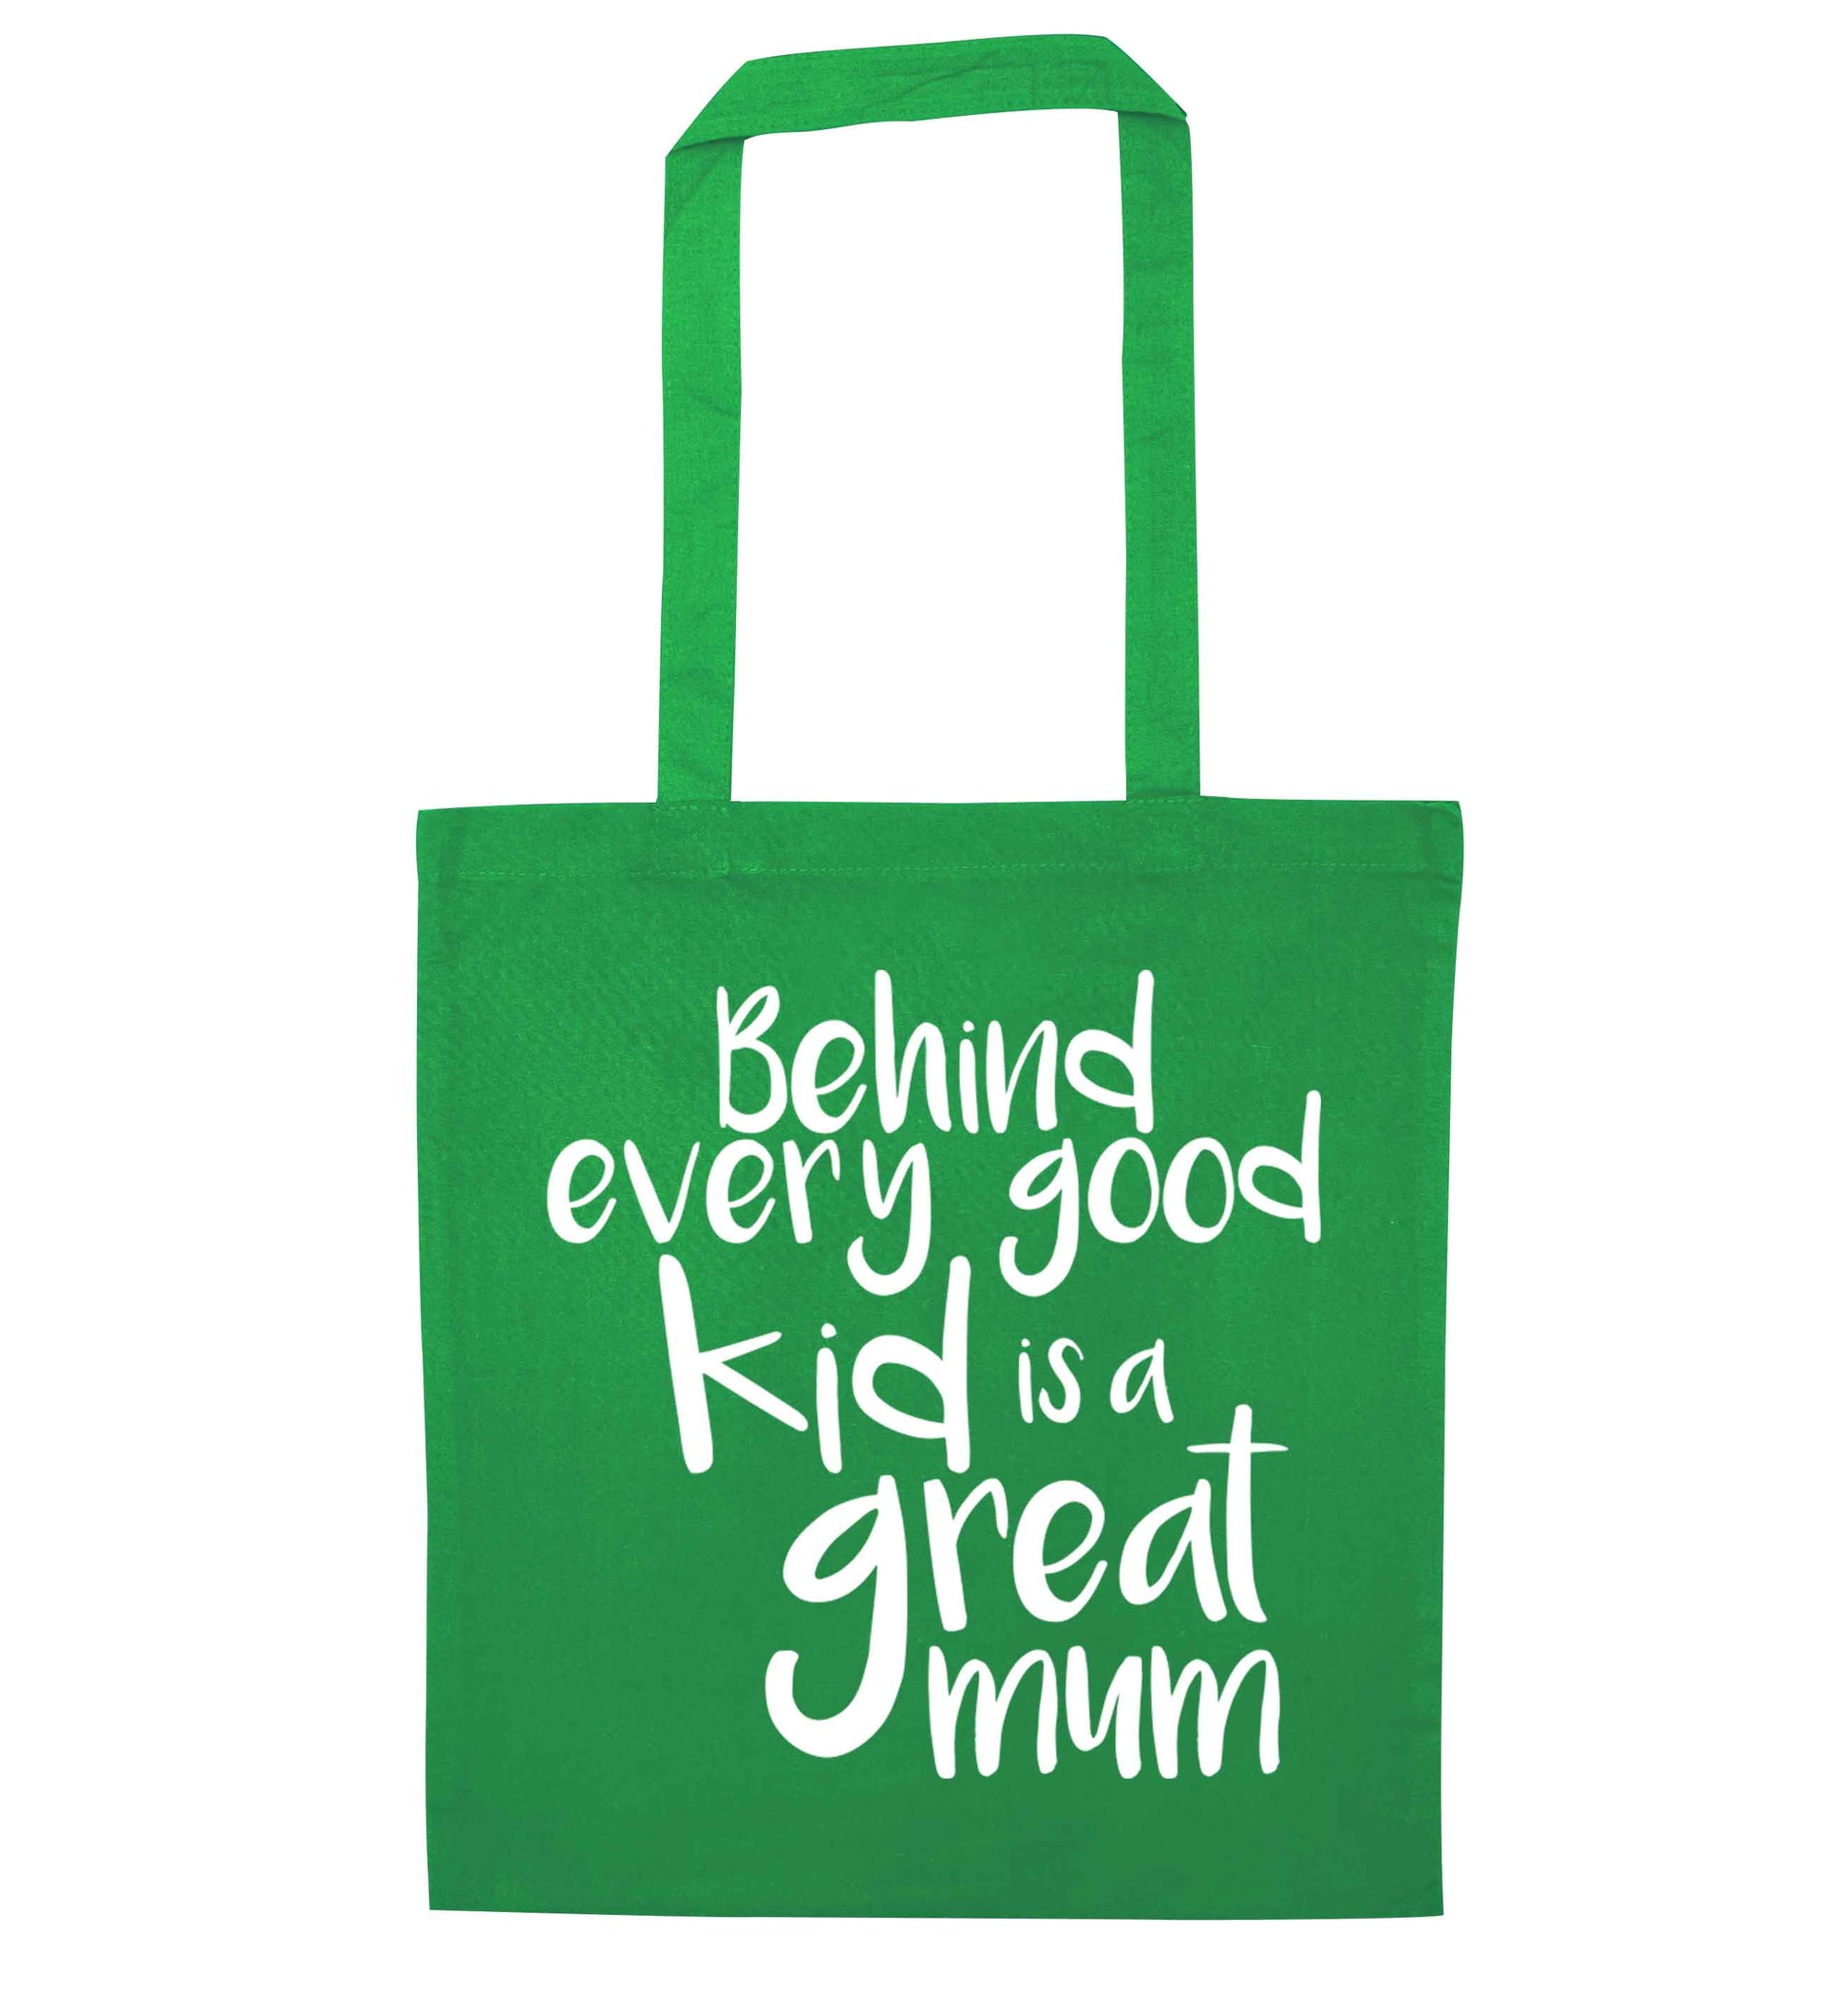 Behind every good kid is a great mum green tote bag